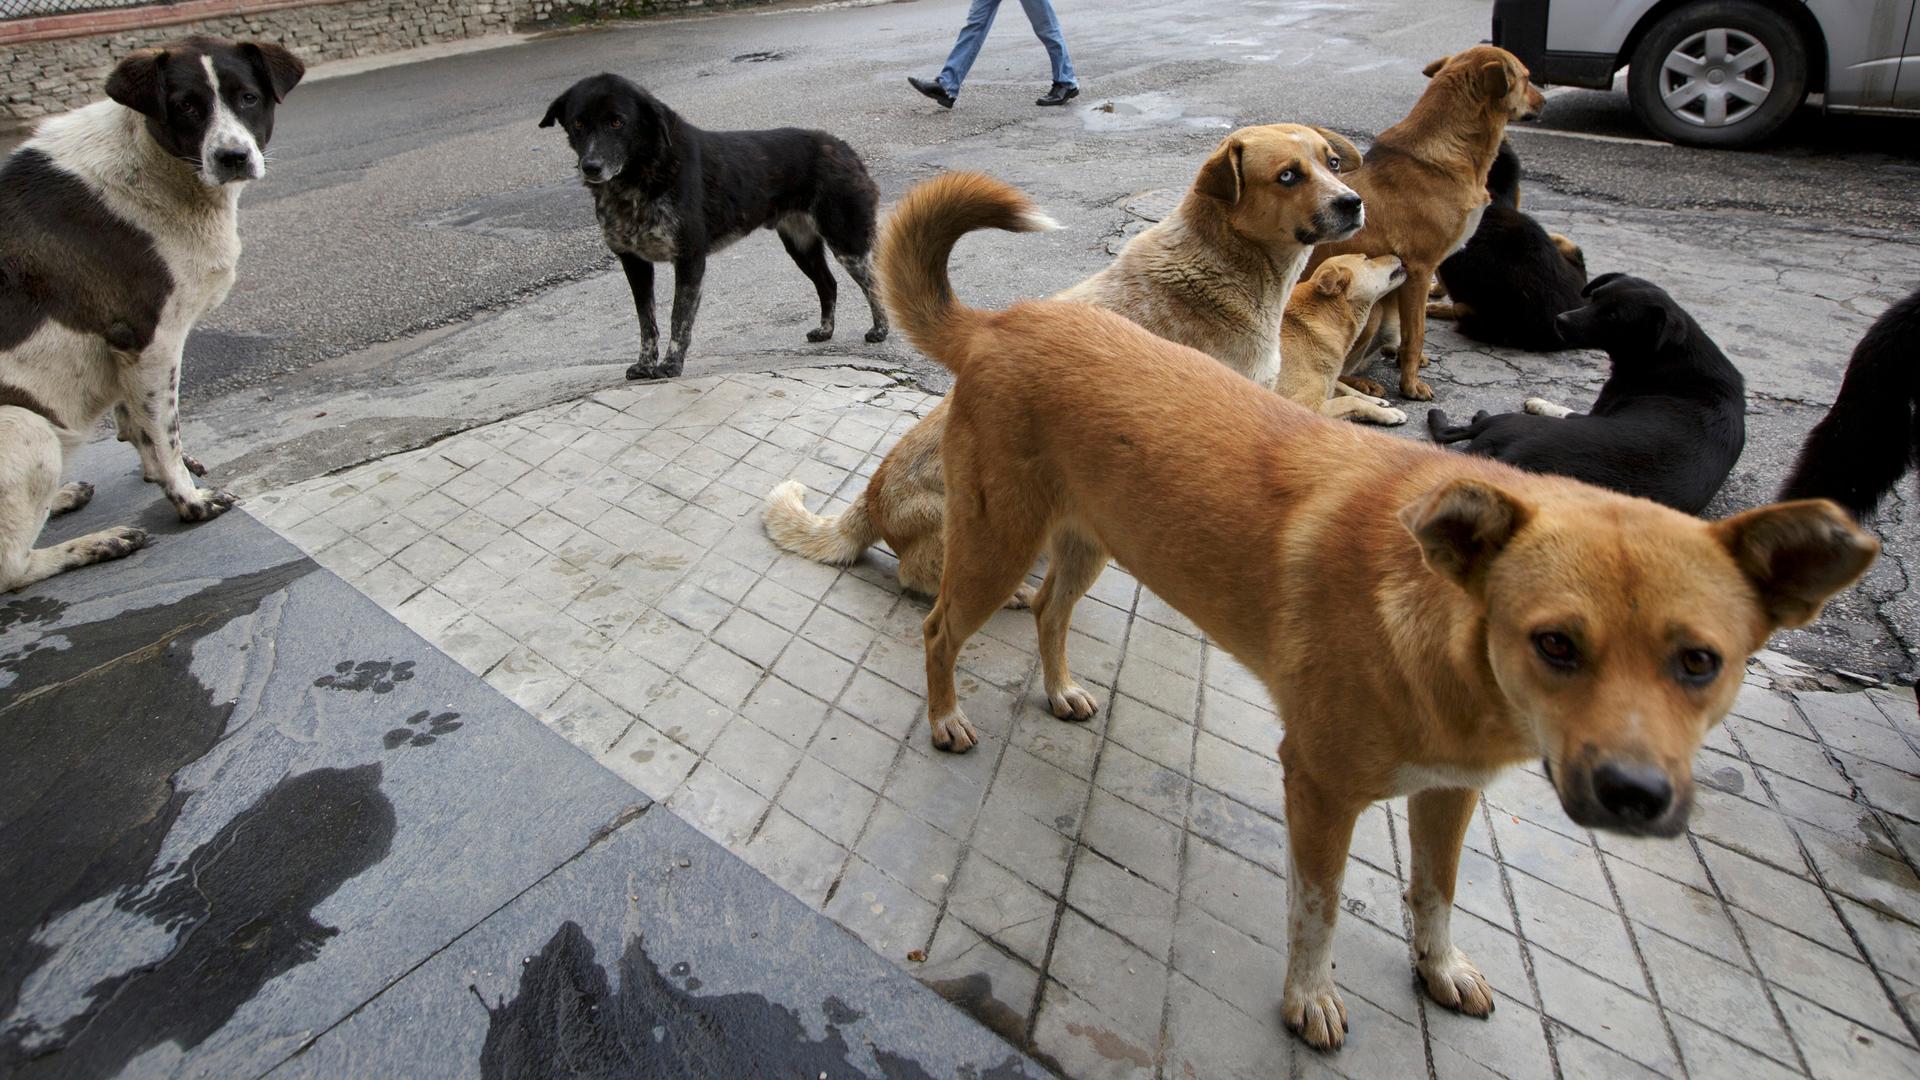 Street dogs lounge around in Bhutan's capital Thimpu as people walk by. As shown by the dog in the front, when dogs are vaccinated and sterilized, their ears are notched to mark them as treated.